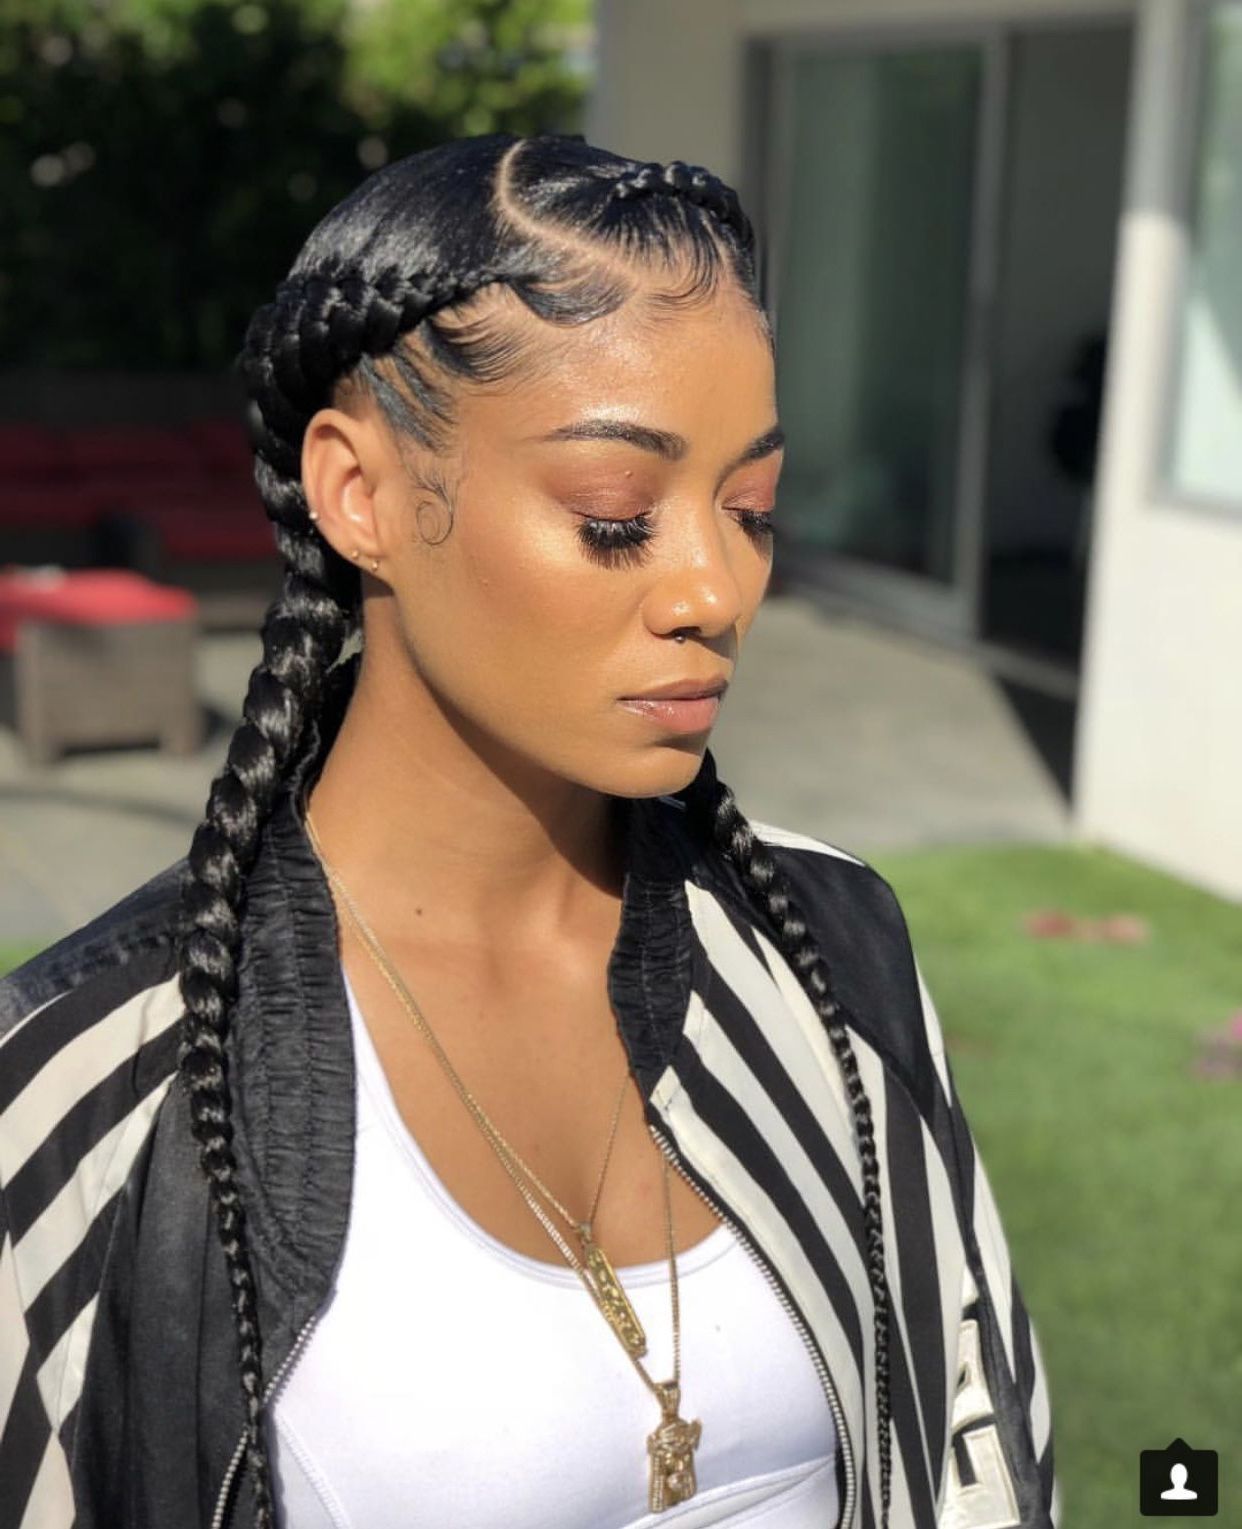 Skin Care Tips For Teens In 2019 For 2019 Tight Black Swirling Under Braid Hairstyles (View 12 of 20)